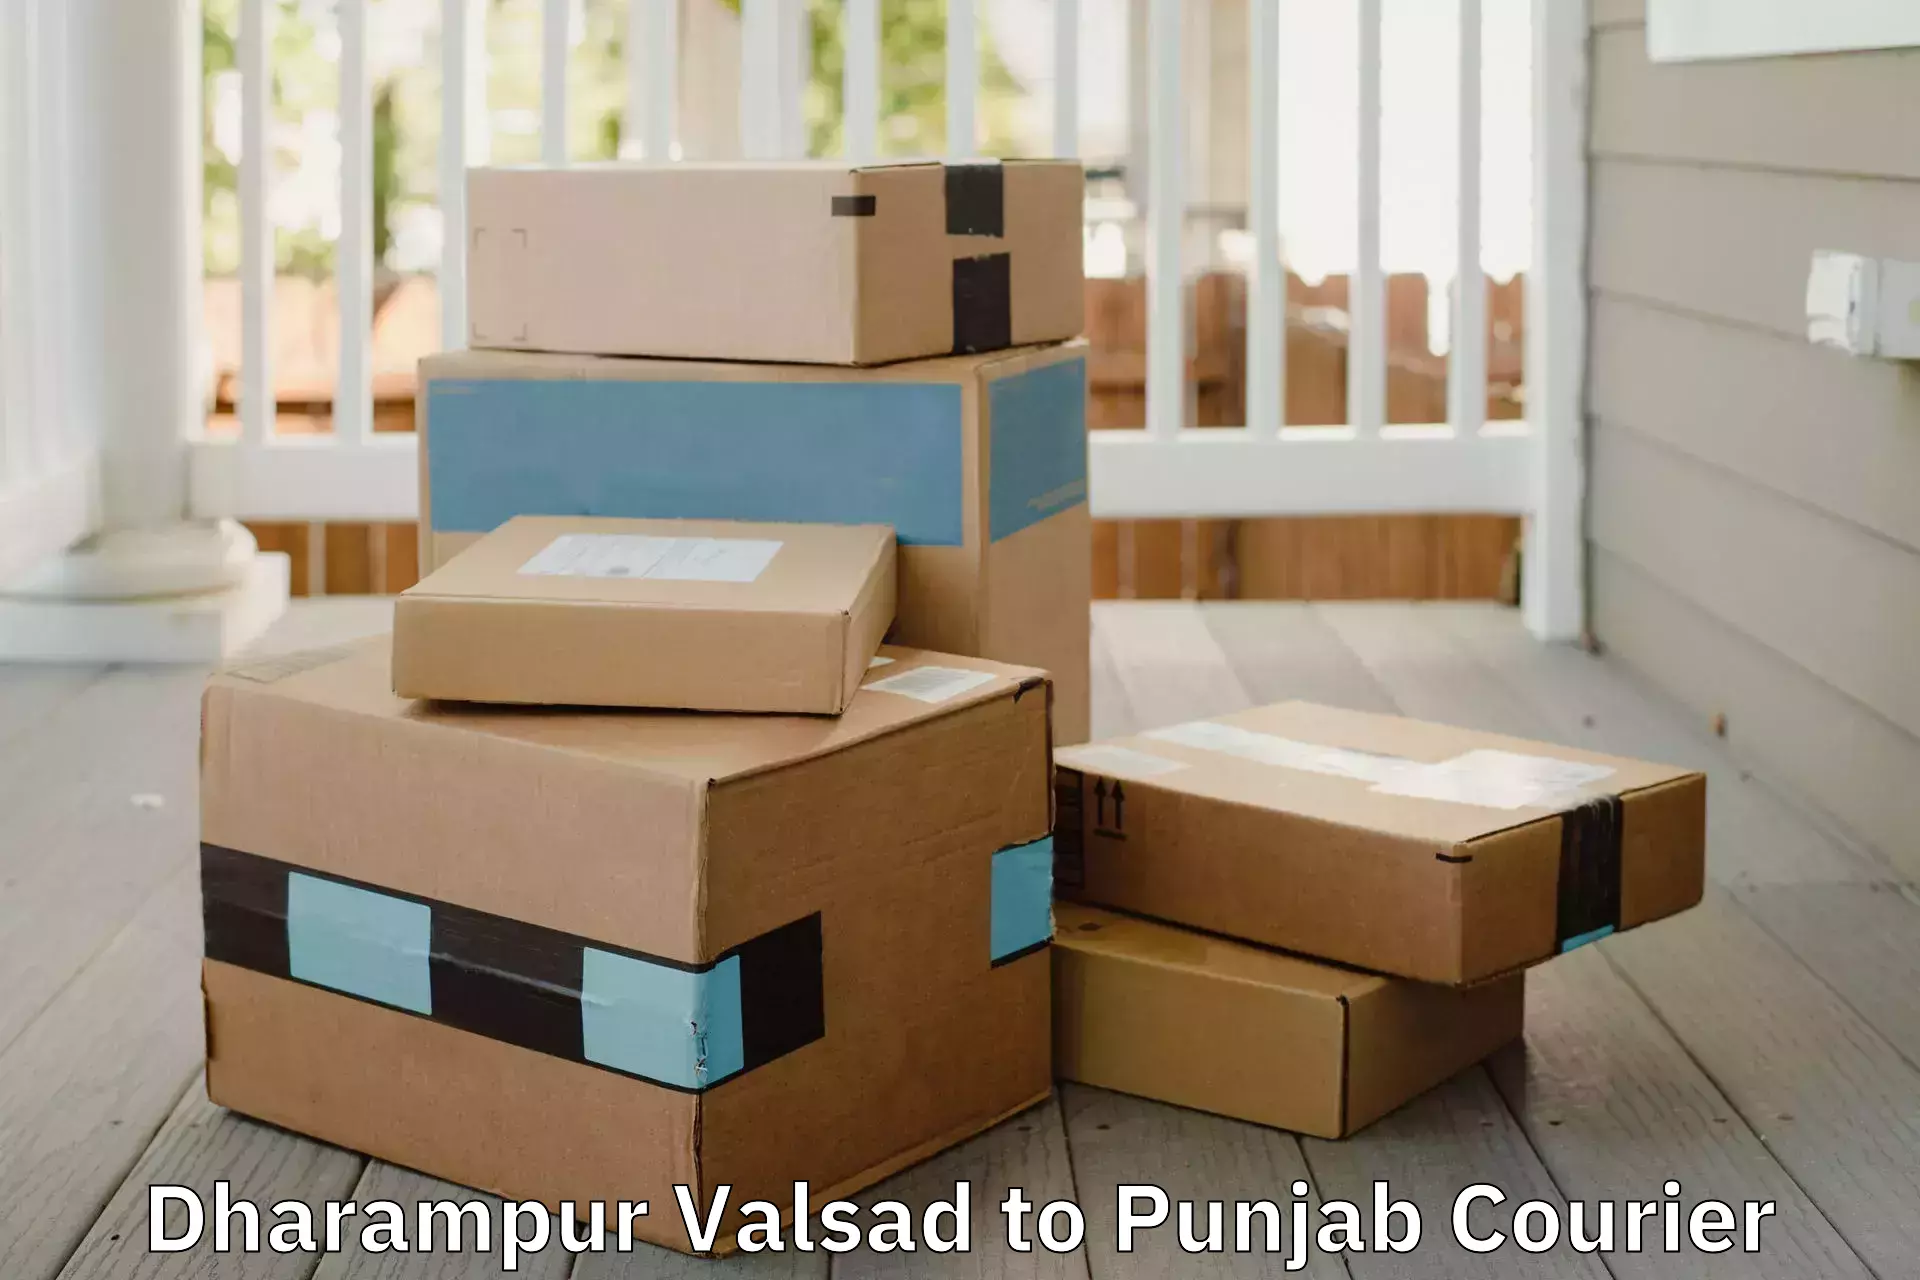 Budget-friendly moving services Dharampur Valsad to Talwara